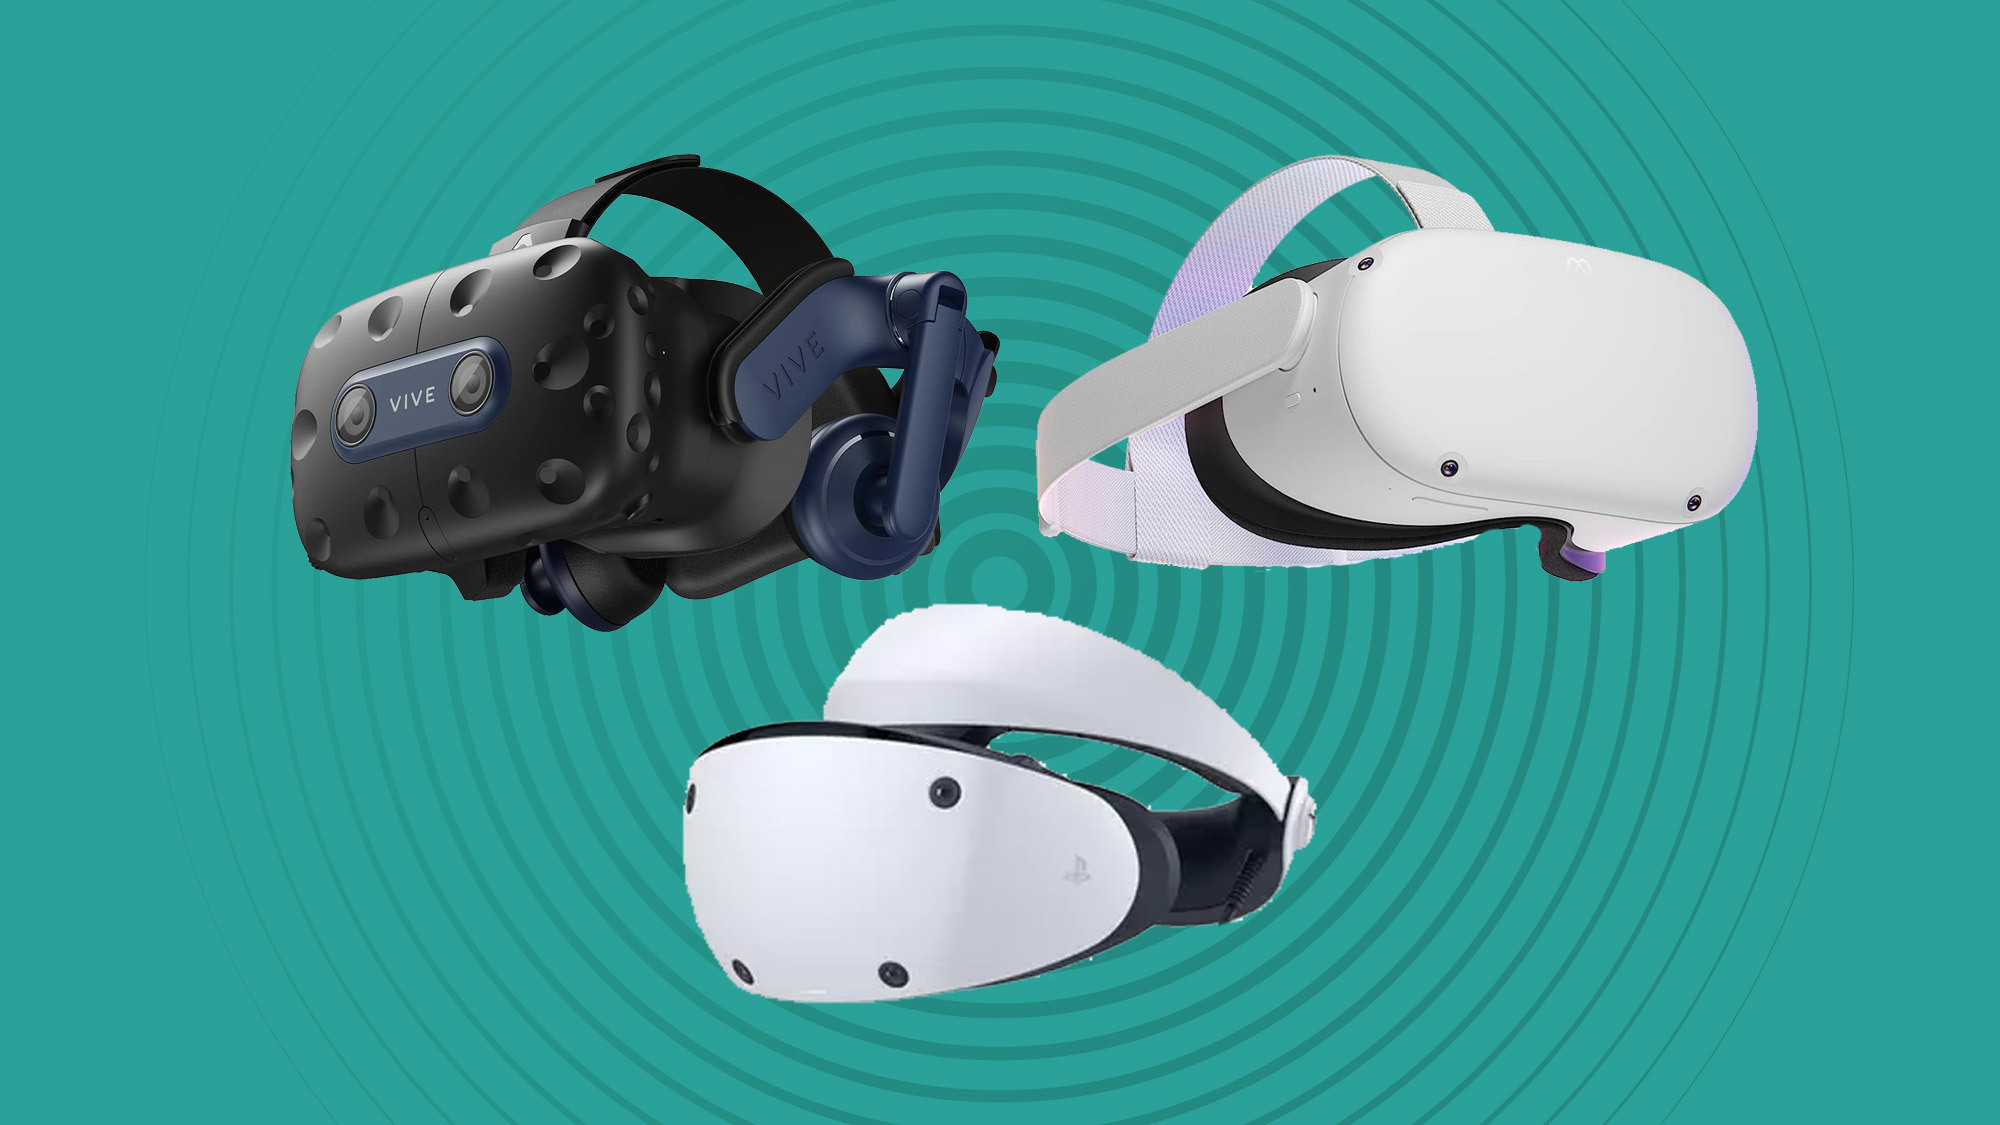 Step into VR with $70 off of the Meta Quest 2 and two free games